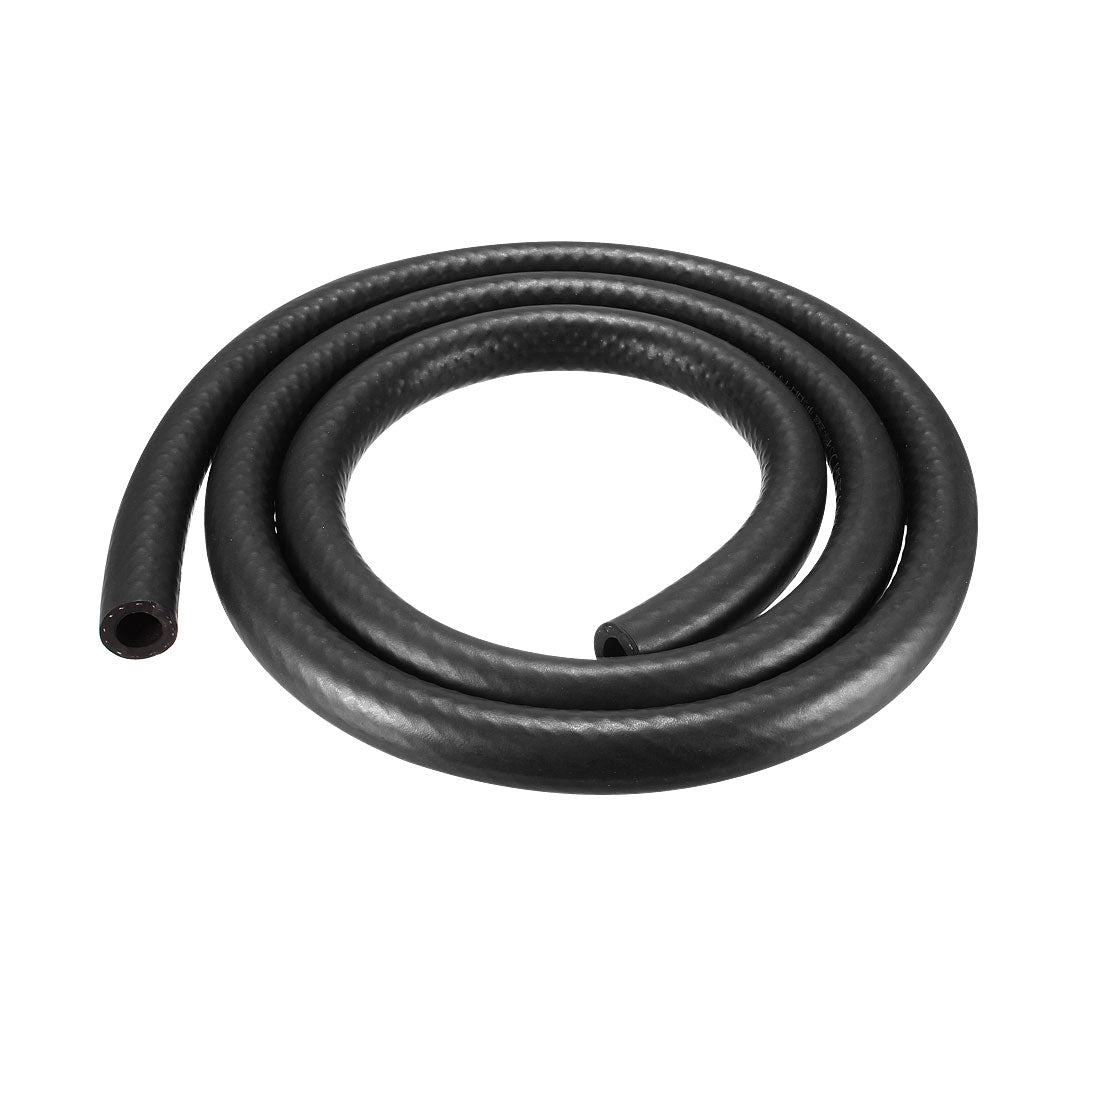 uxcell Uxcell Fuel Line Fuel Hose Rubber  12mm I.D.  1.5M/4.9FT  Diesel Petrol Hose Engine Pipe Tubing